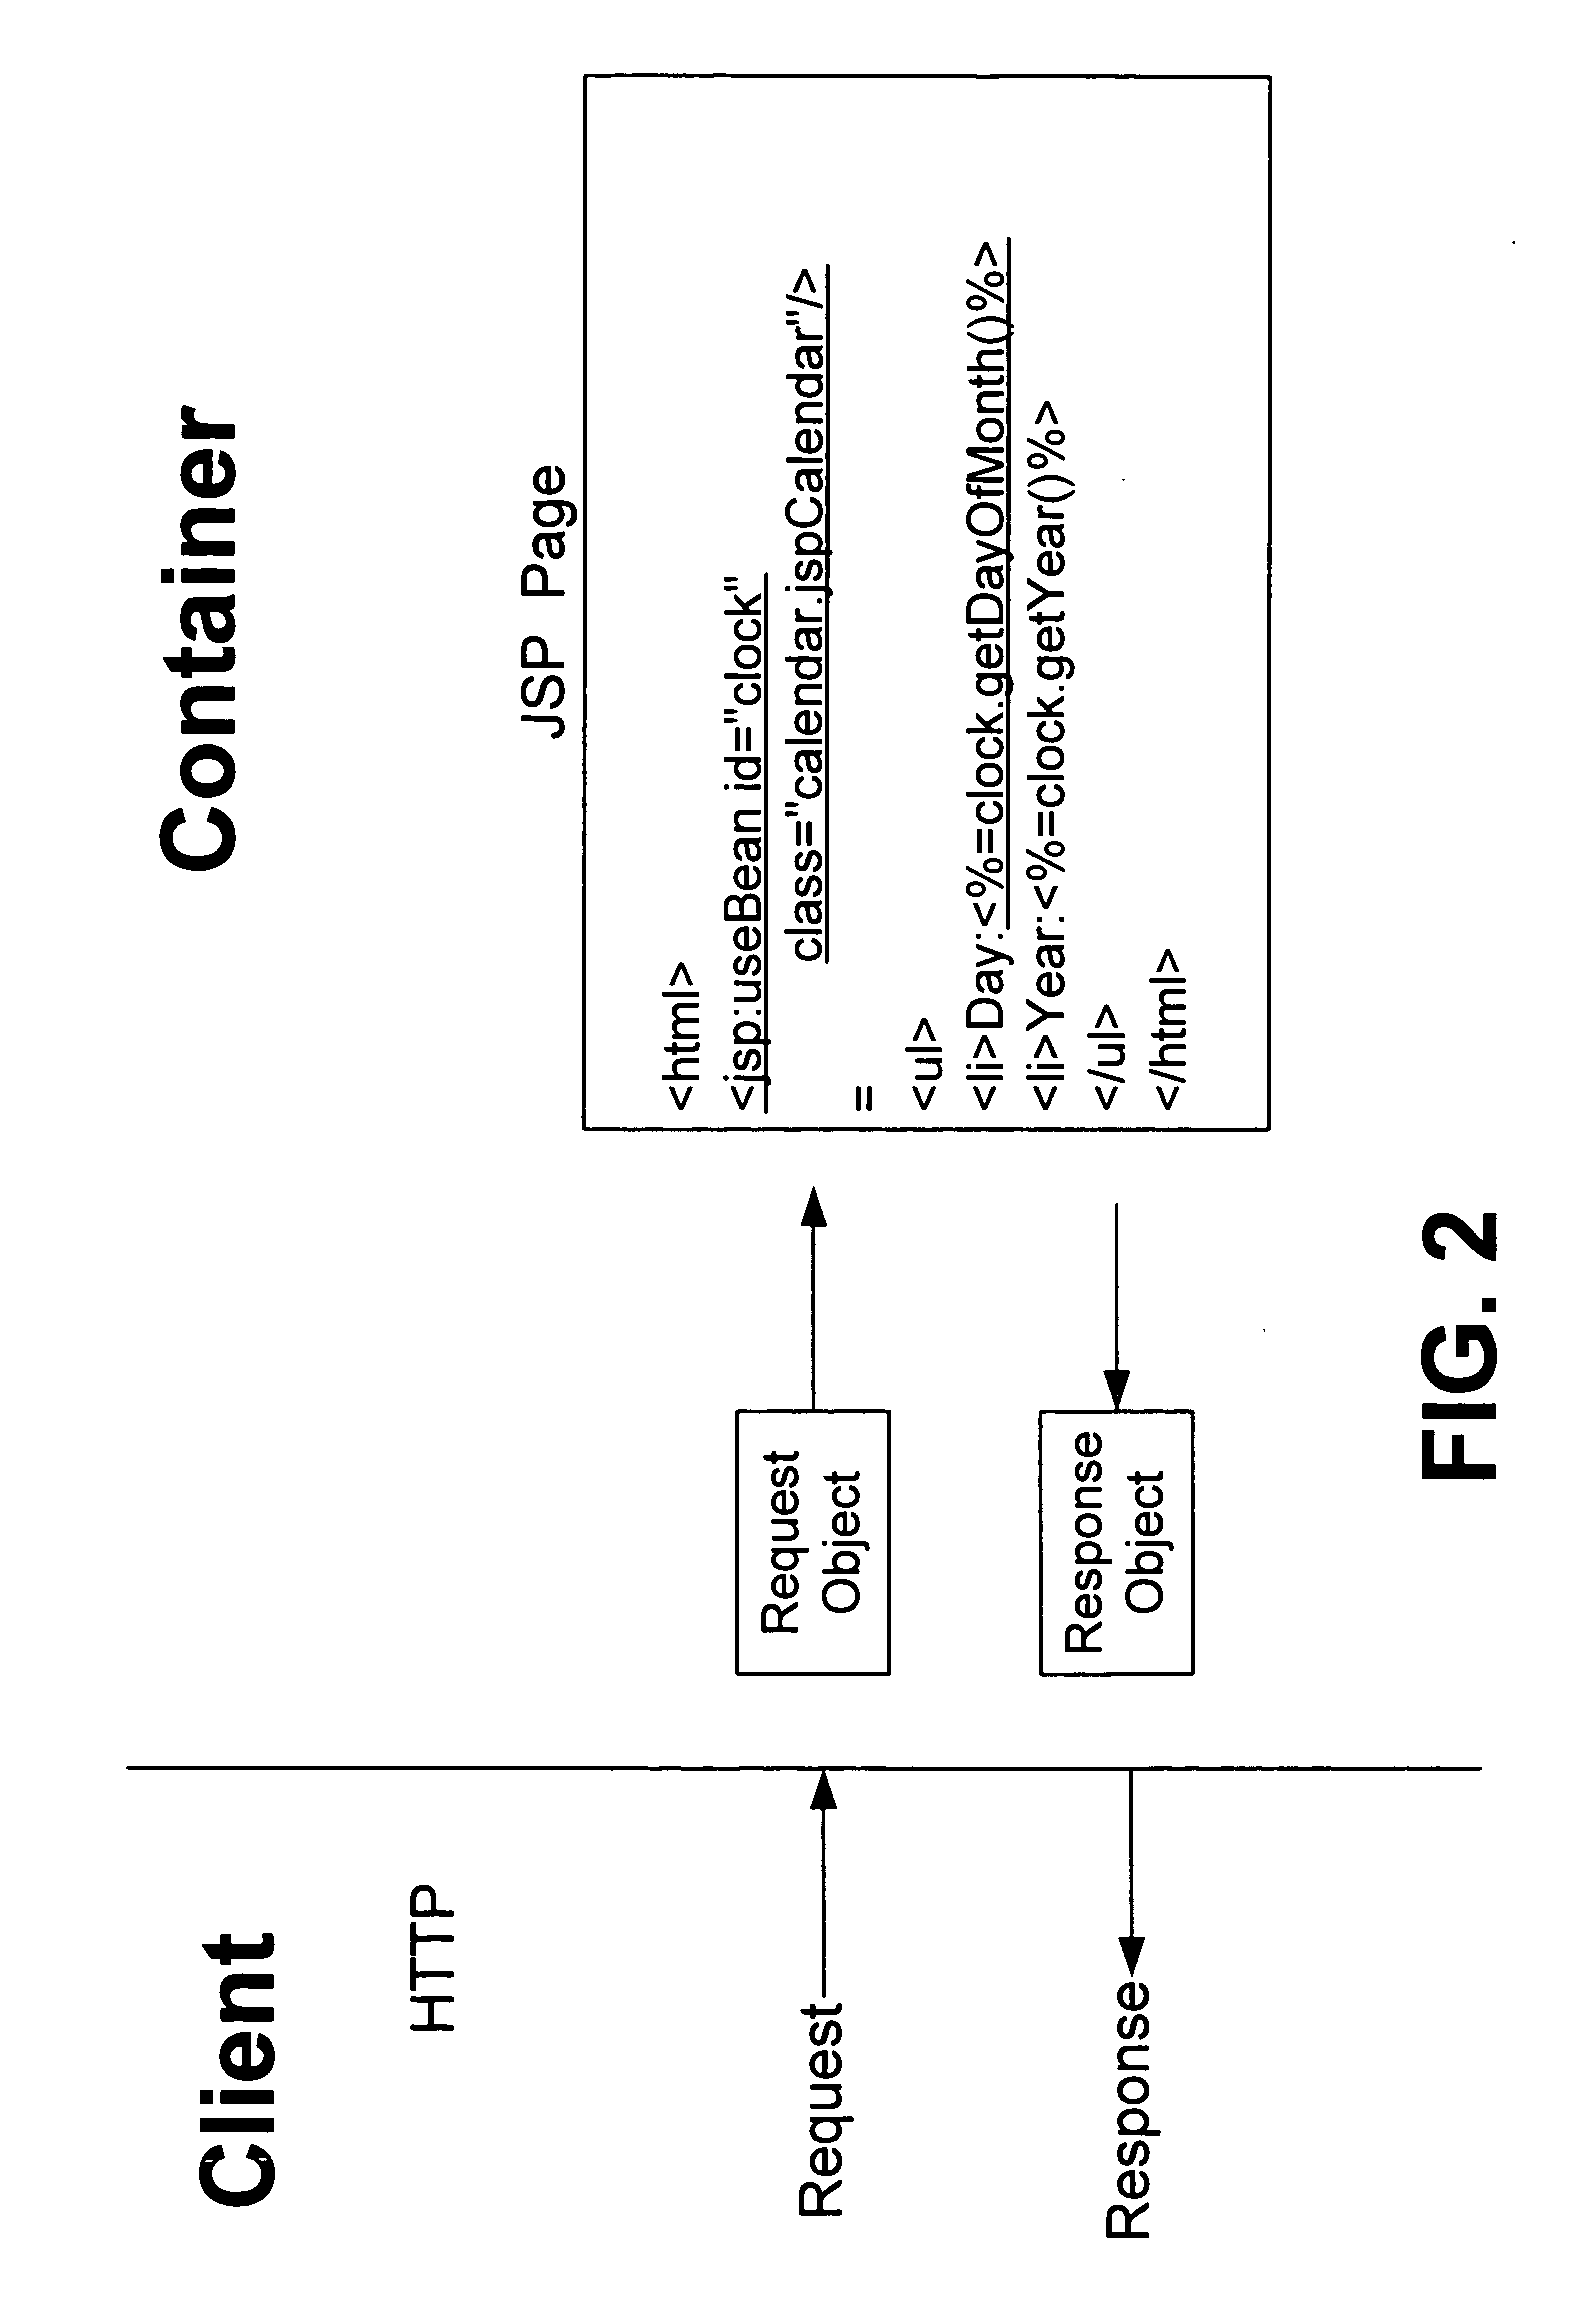 Mechanism for automatic synchronization of scripting variables